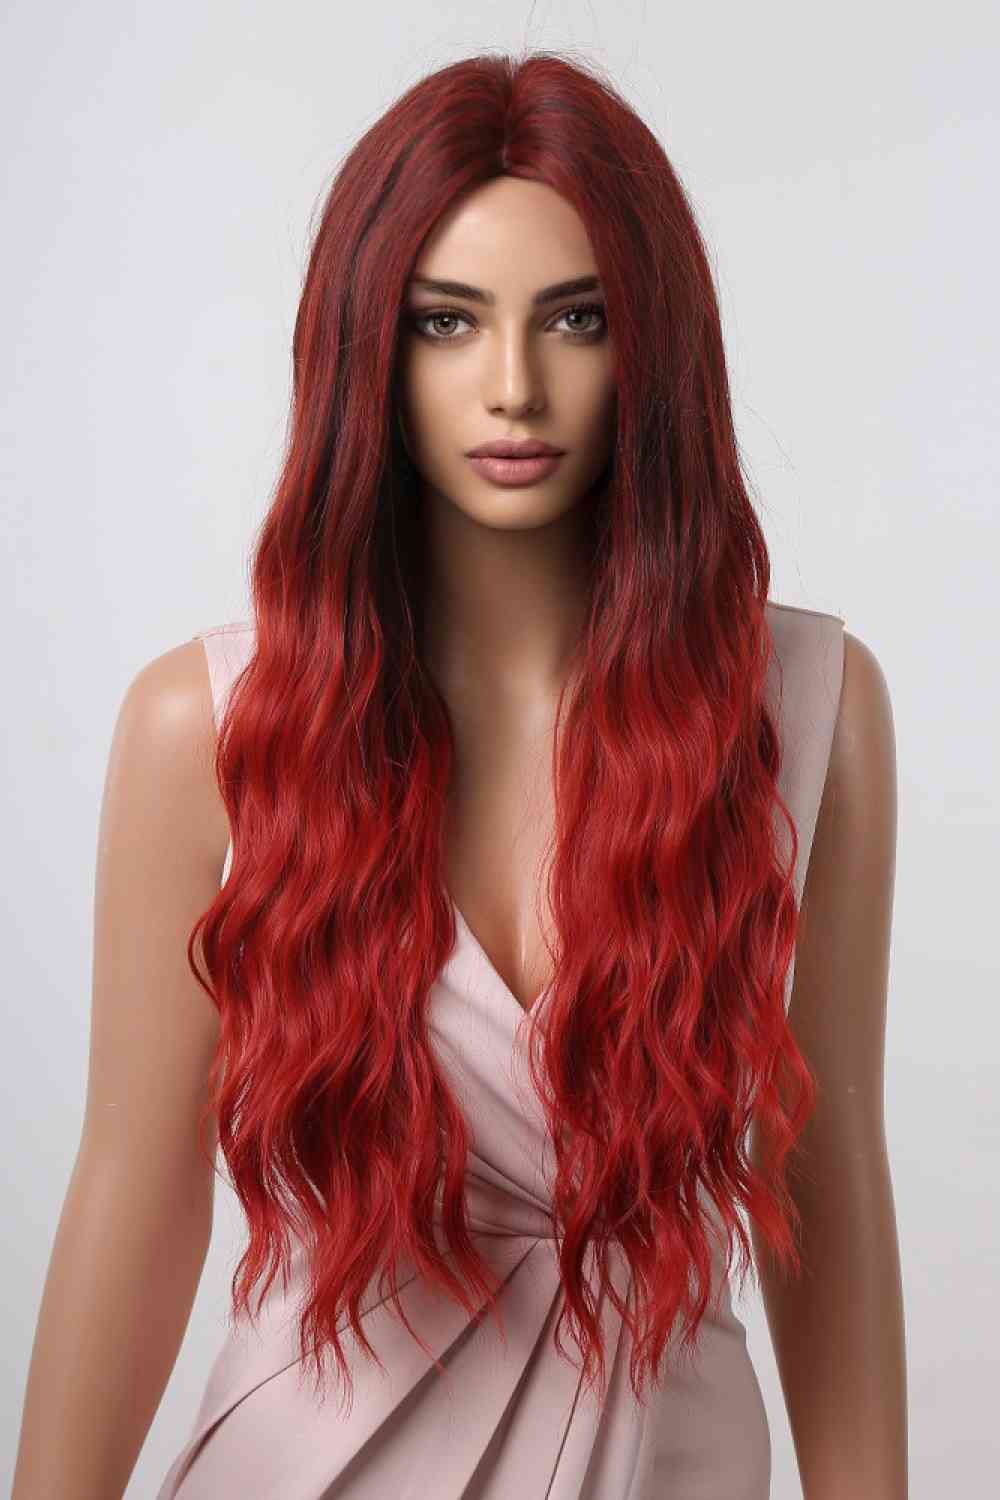 13*1" Full-Machine Wigs Synthetic Long Wave 27"